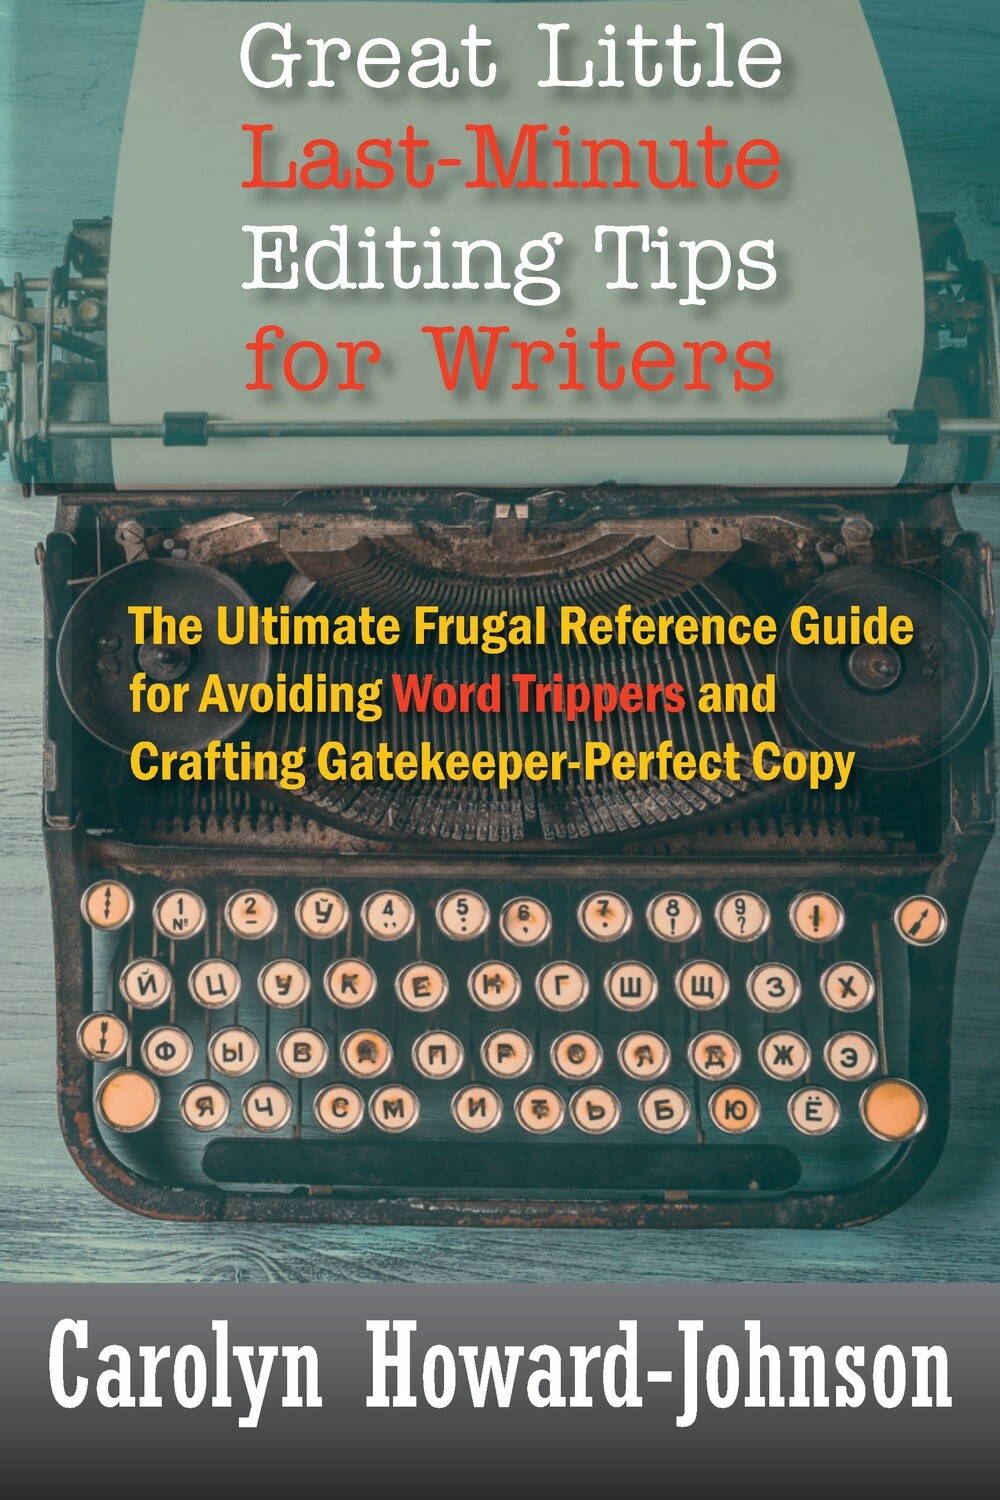 Great Little Last-Minute Editing Tips for Writers